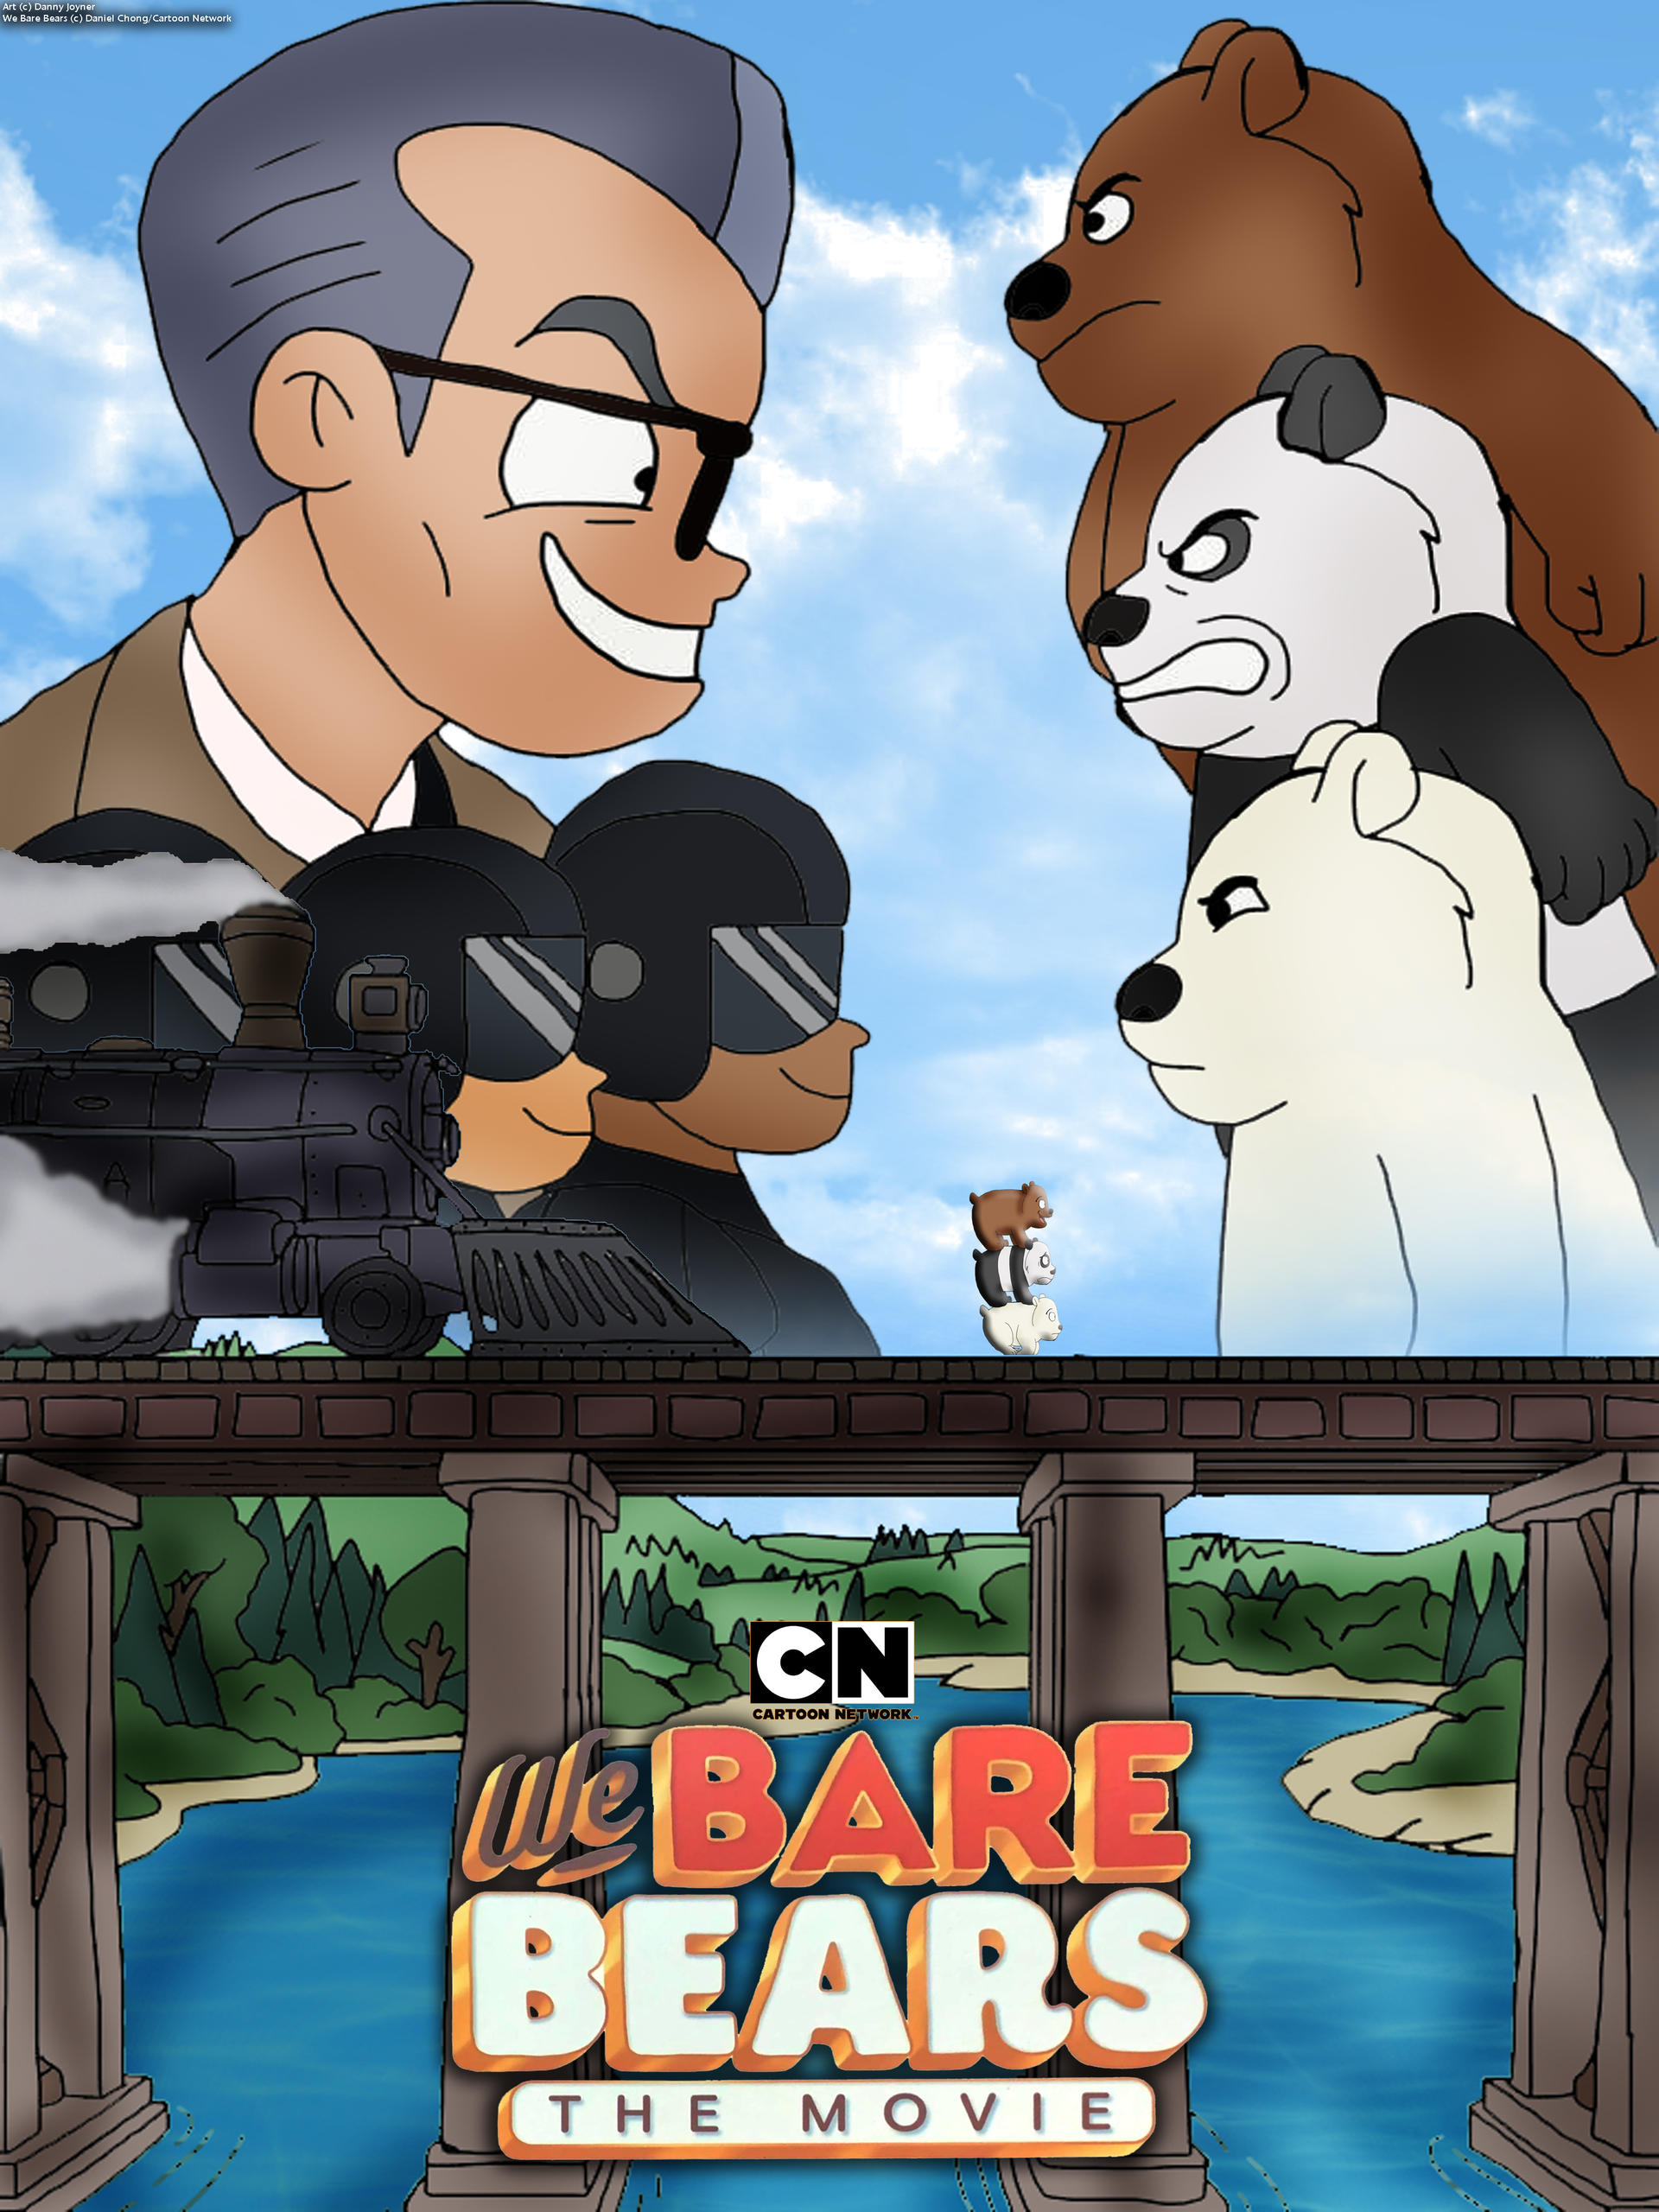 We Bare Bears The Movie Poster By Rdj1995 On Deviantart